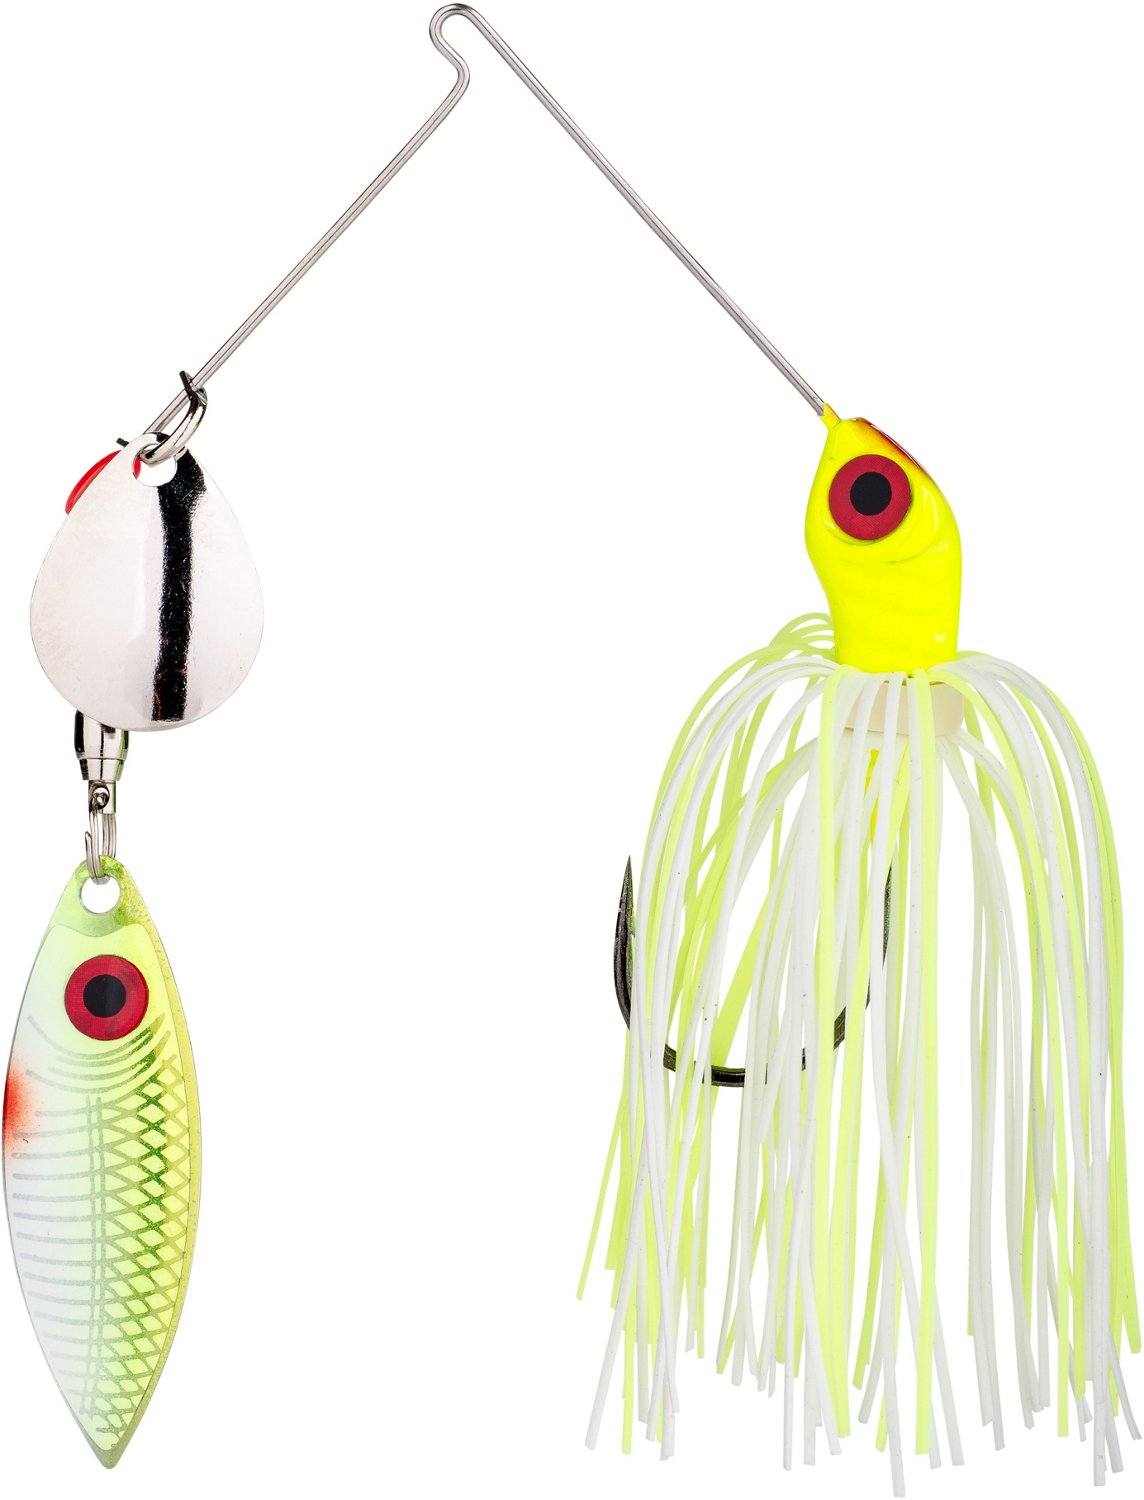 Academy Sports + Outdoors Strike King Red Eyed Special 3/16 oz Spinnerbait